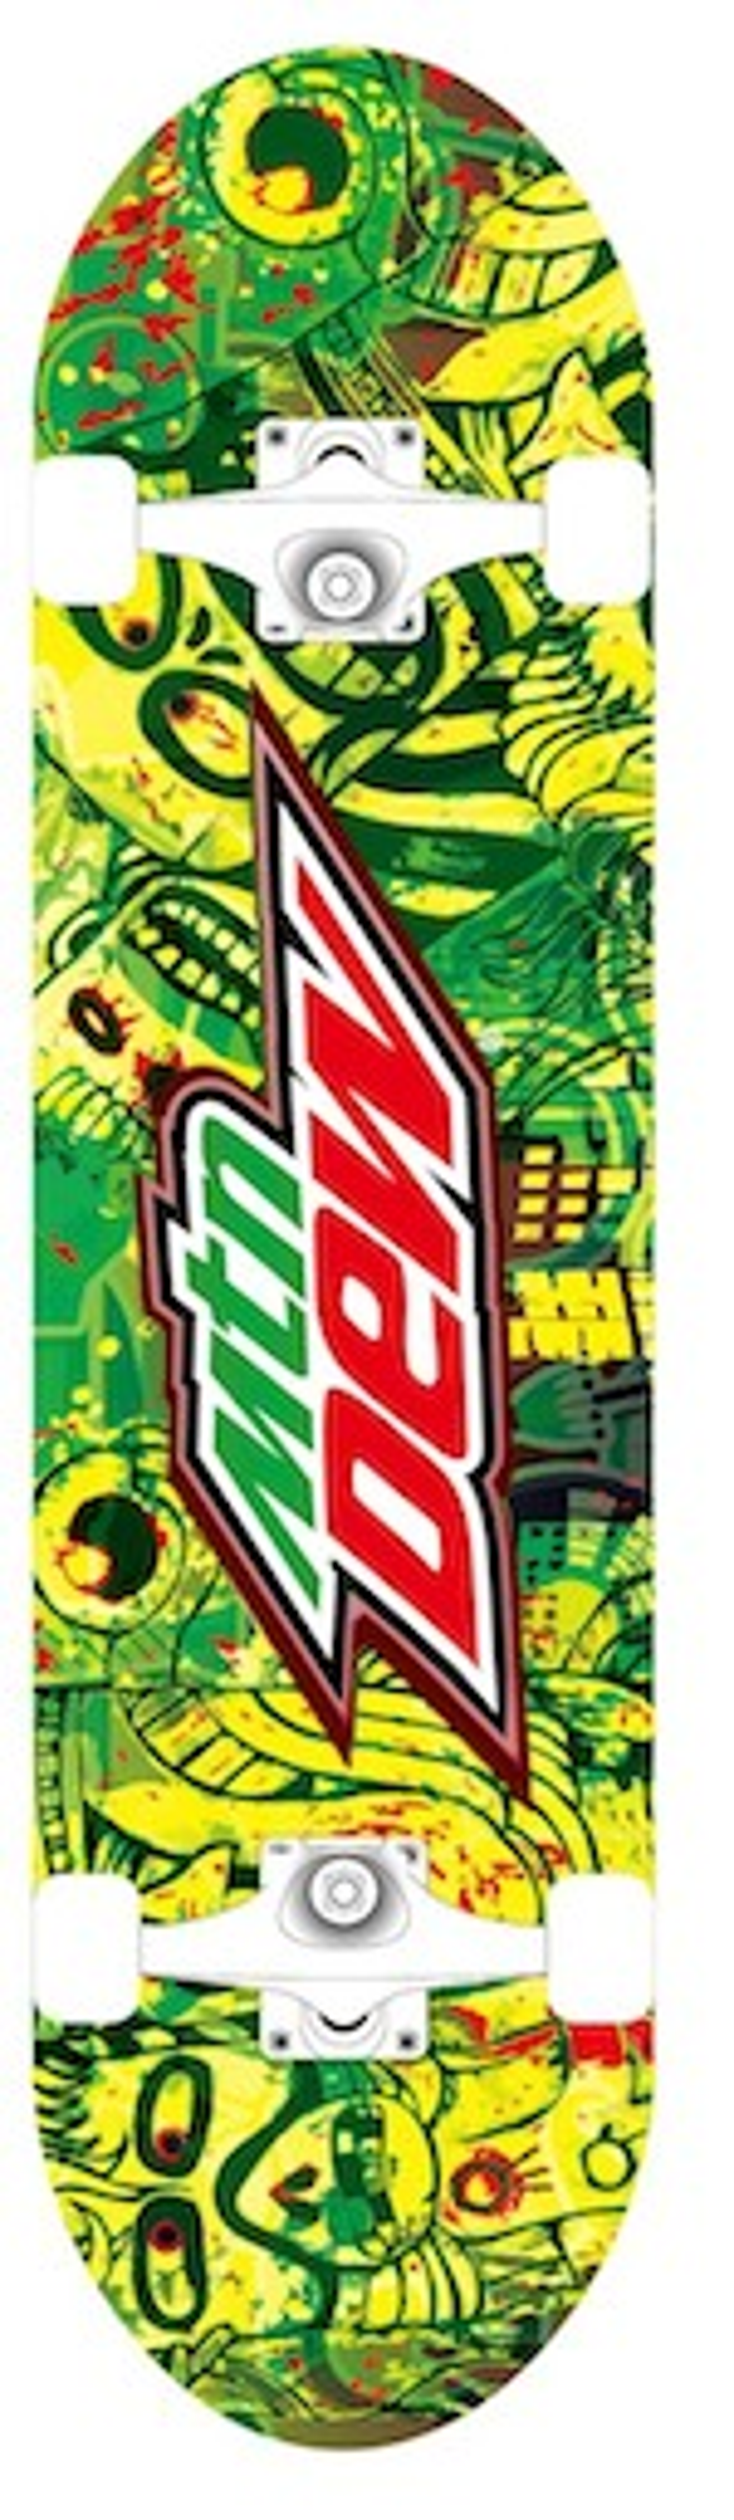 Mountain Dew Gets in on the Action